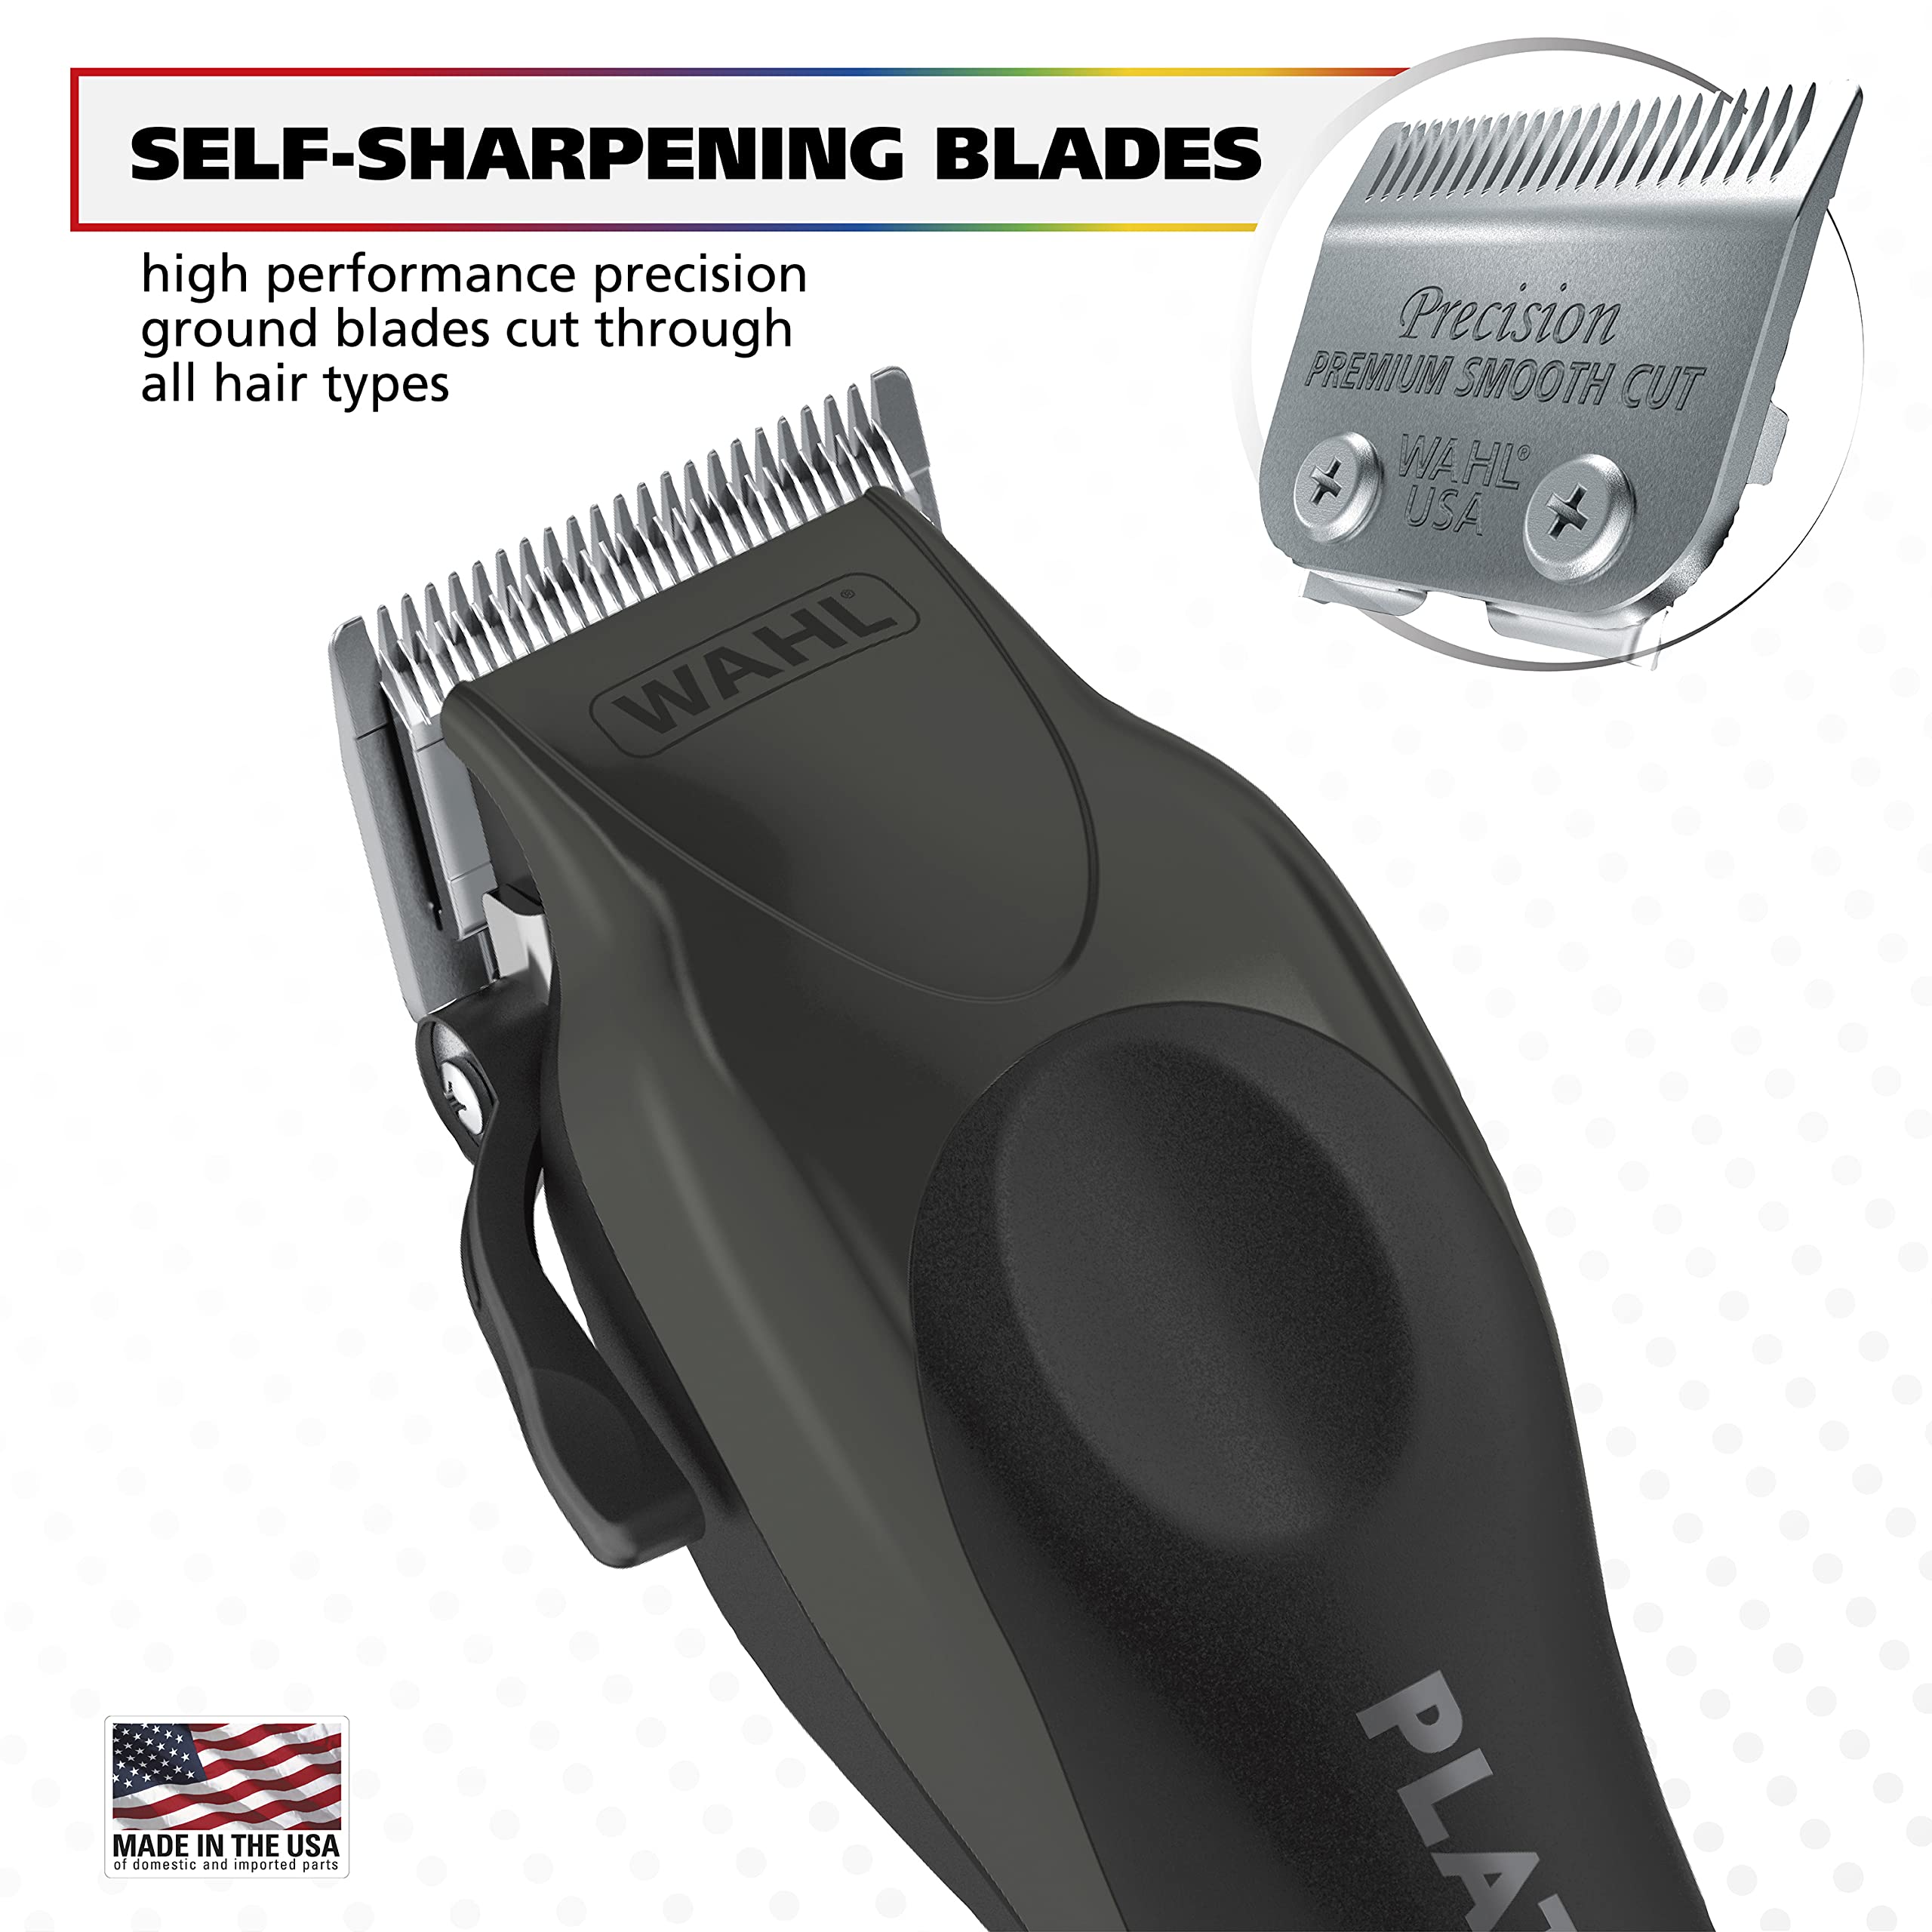 Wahl USA Pro Series Platinum Corded Clipper & Corded Trimmer for Home Haircutting with Premium Secure Fit Color Coded Guide Combs – Model 79804-100